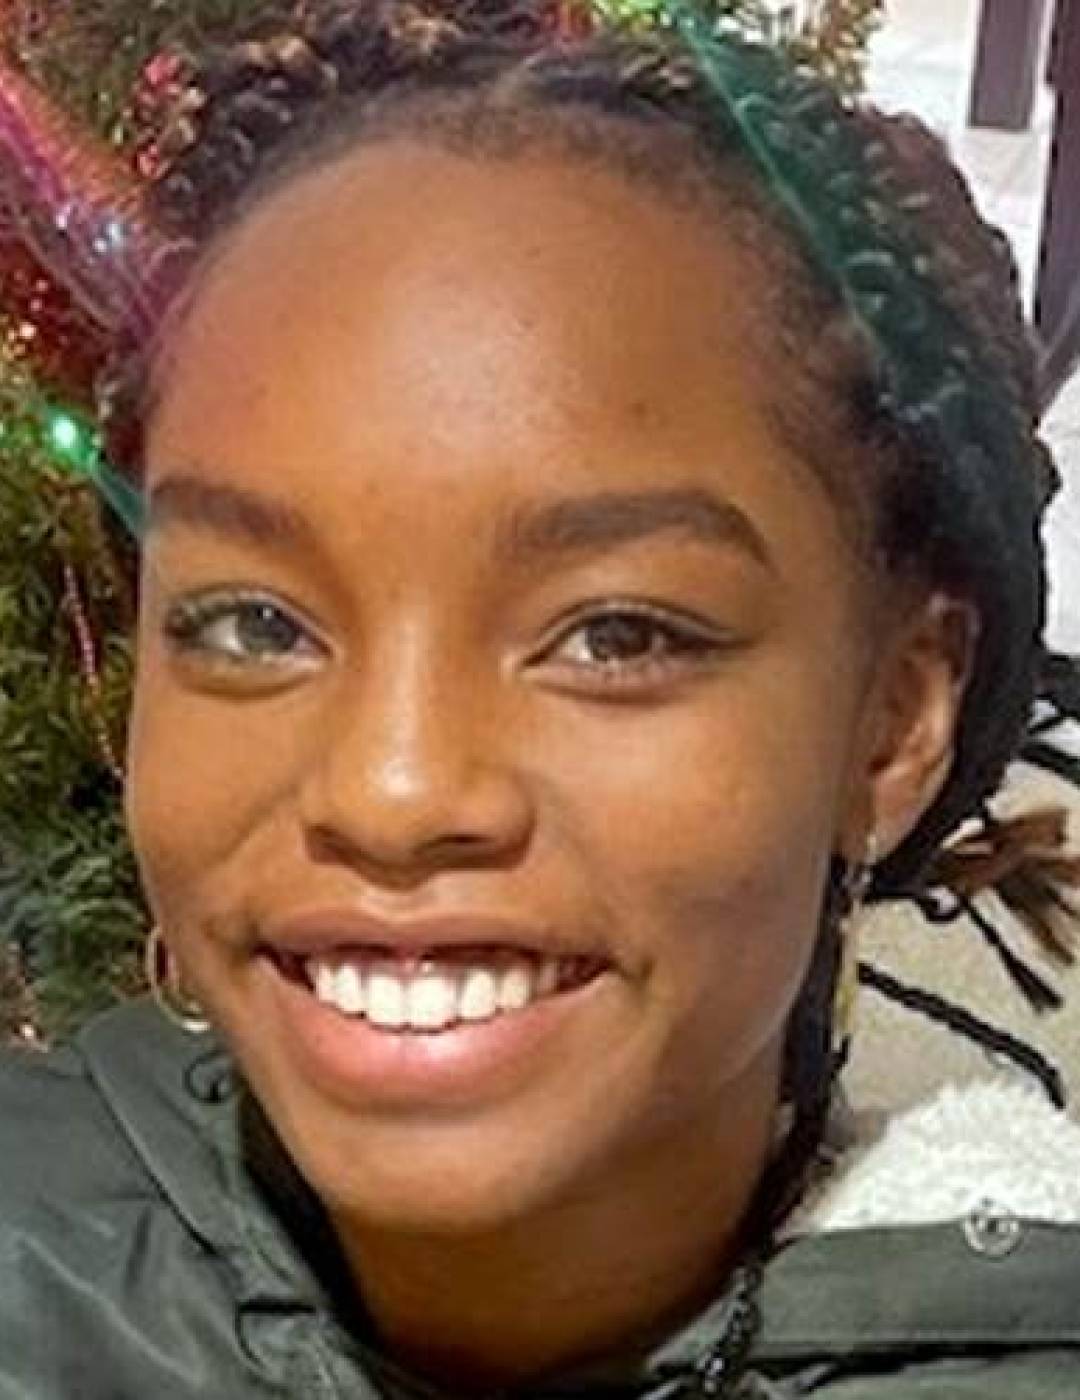 Mariah Cochran. Missing child with black hair and brown eyes.